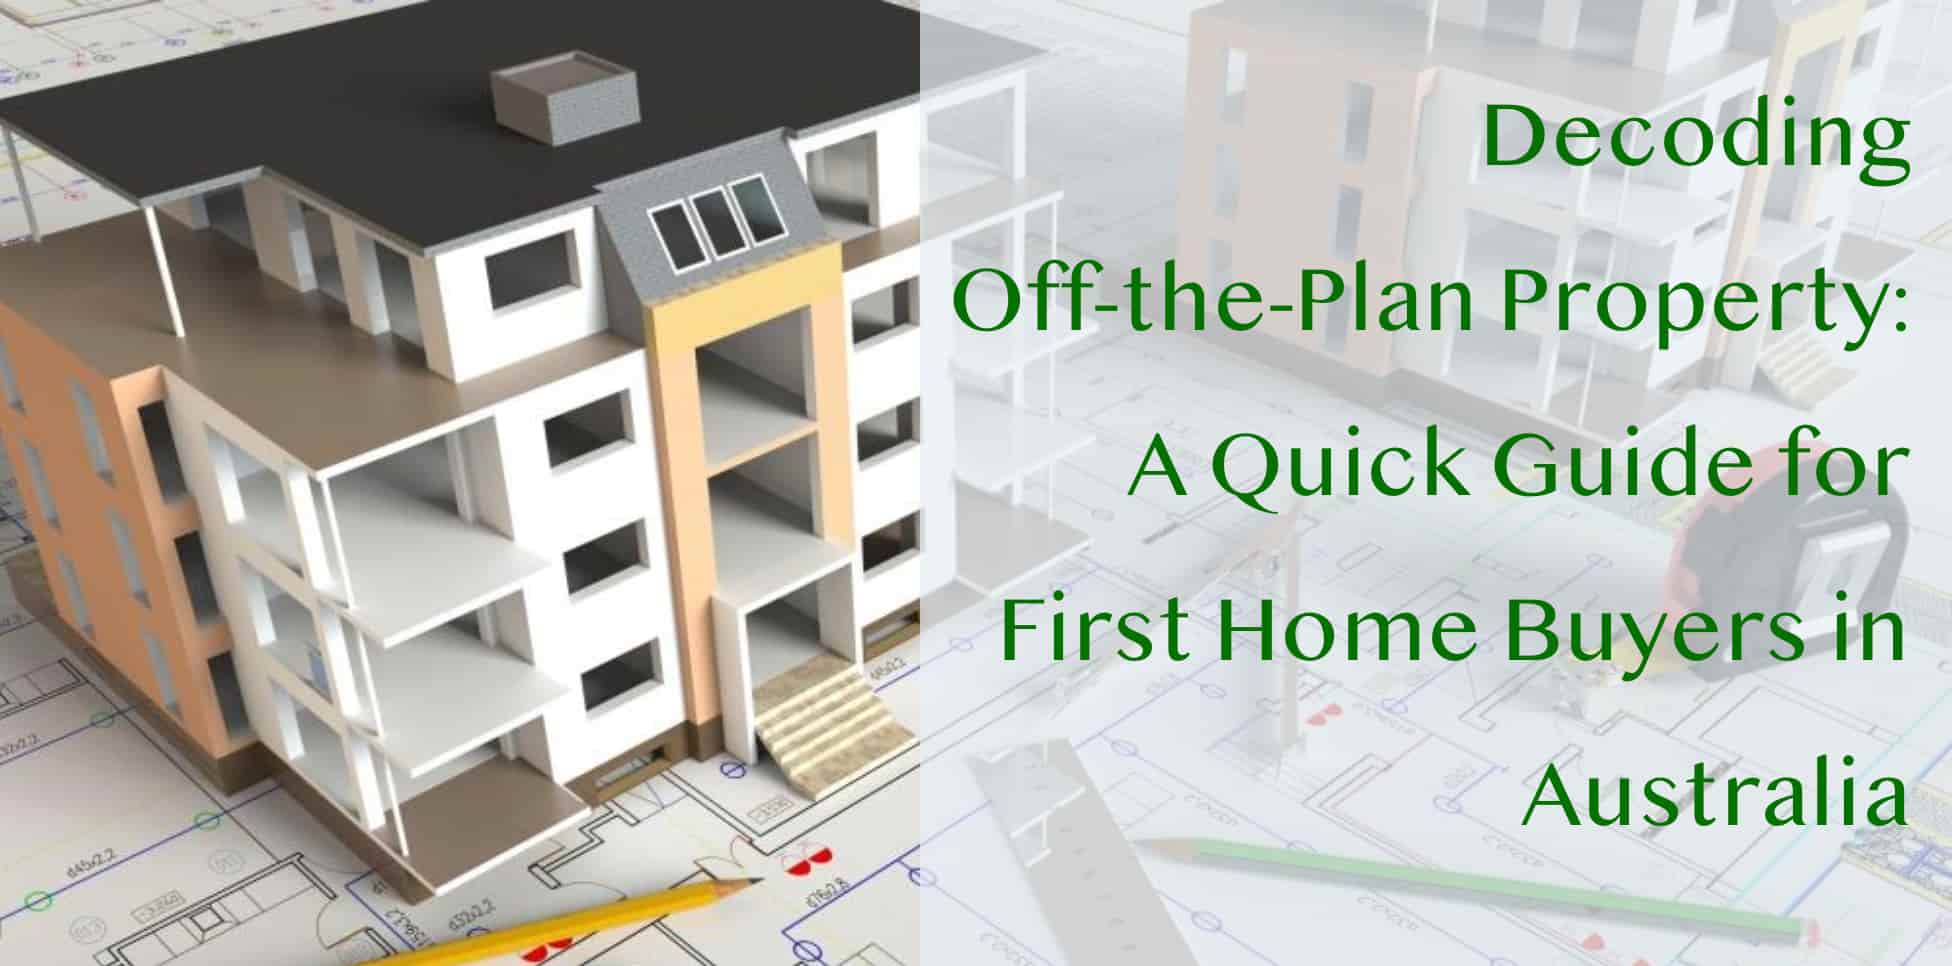 Decoding Off-the-Plan Property: A Quick Guide for First Home Buyers in Australia